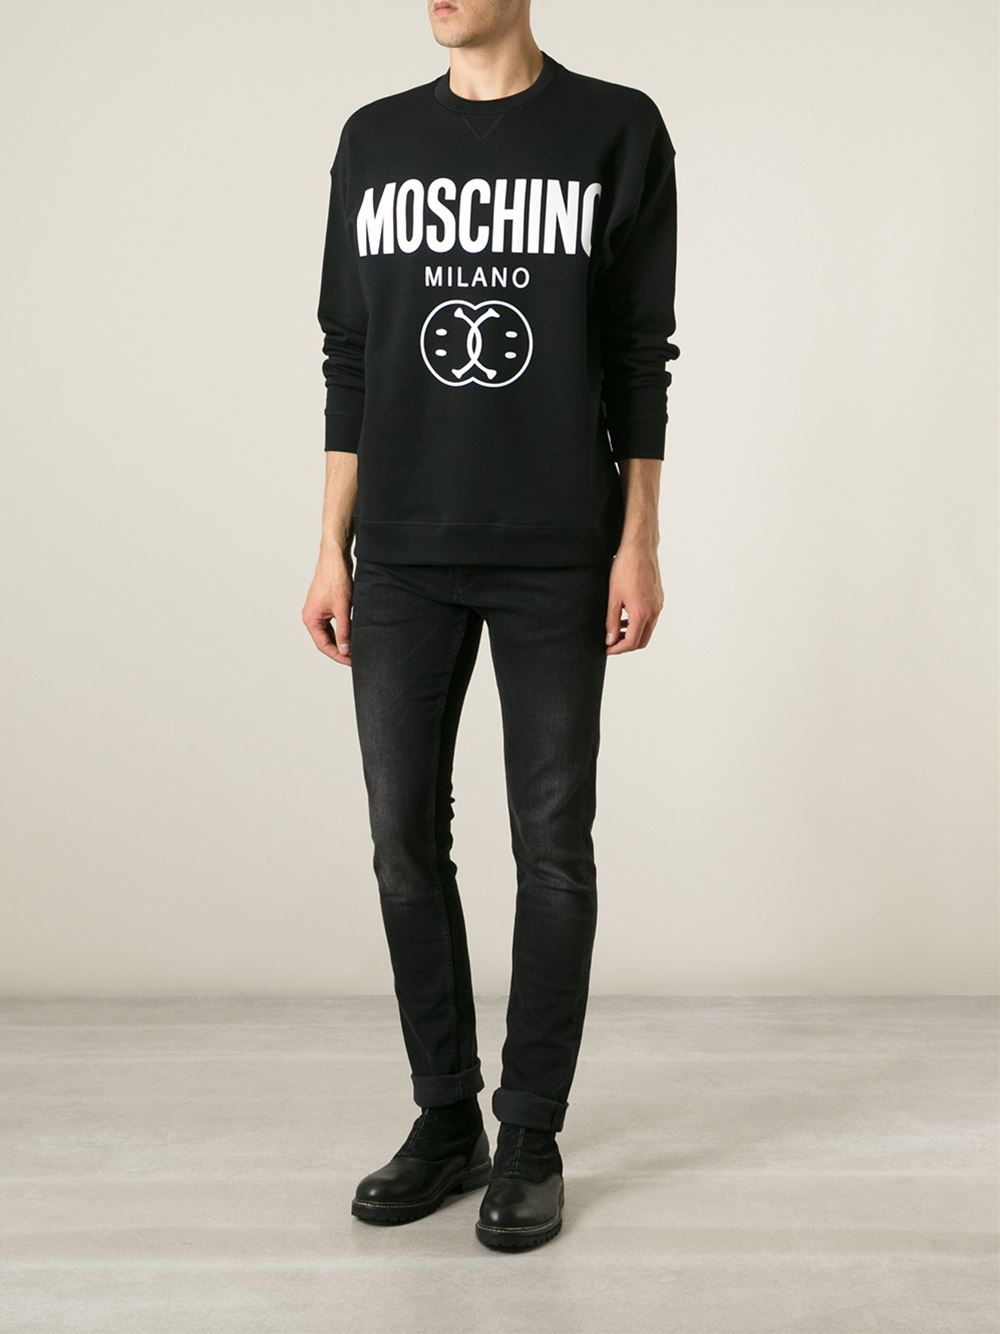 Moschino Smiley And Logo Print Sweatshirt in Black for Men - Lyst